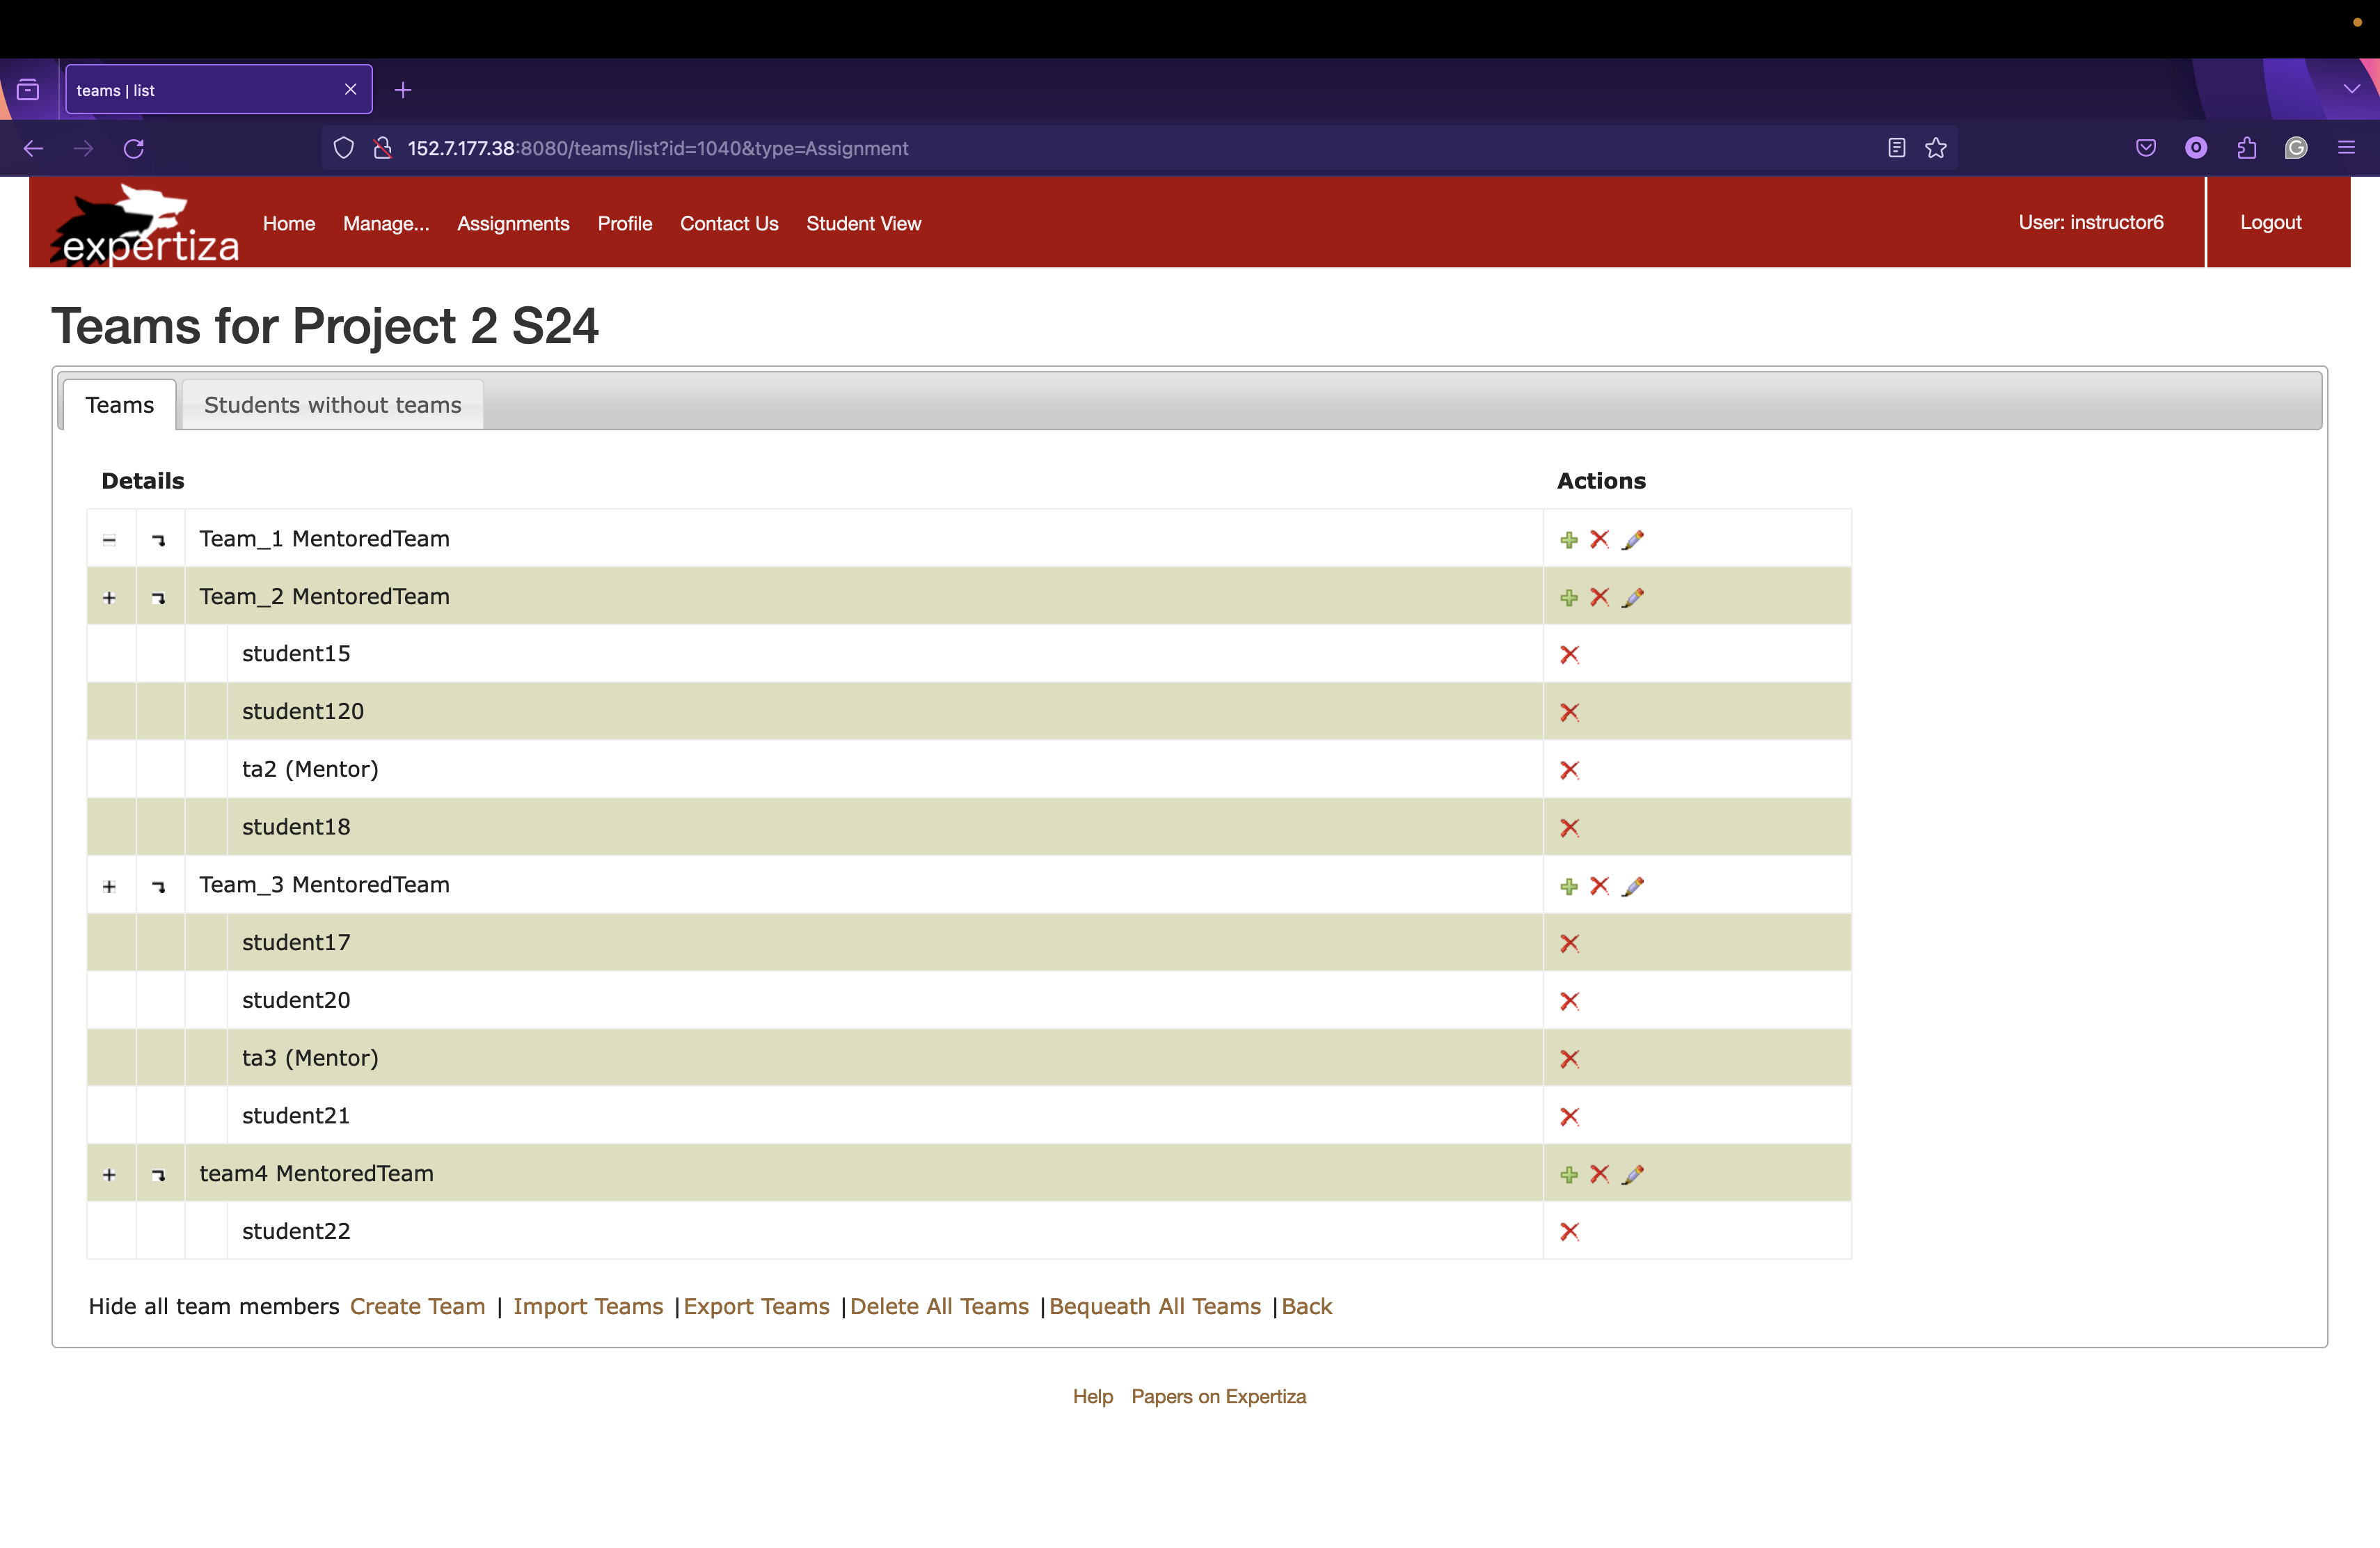 Screenshot 1. The old team listing view